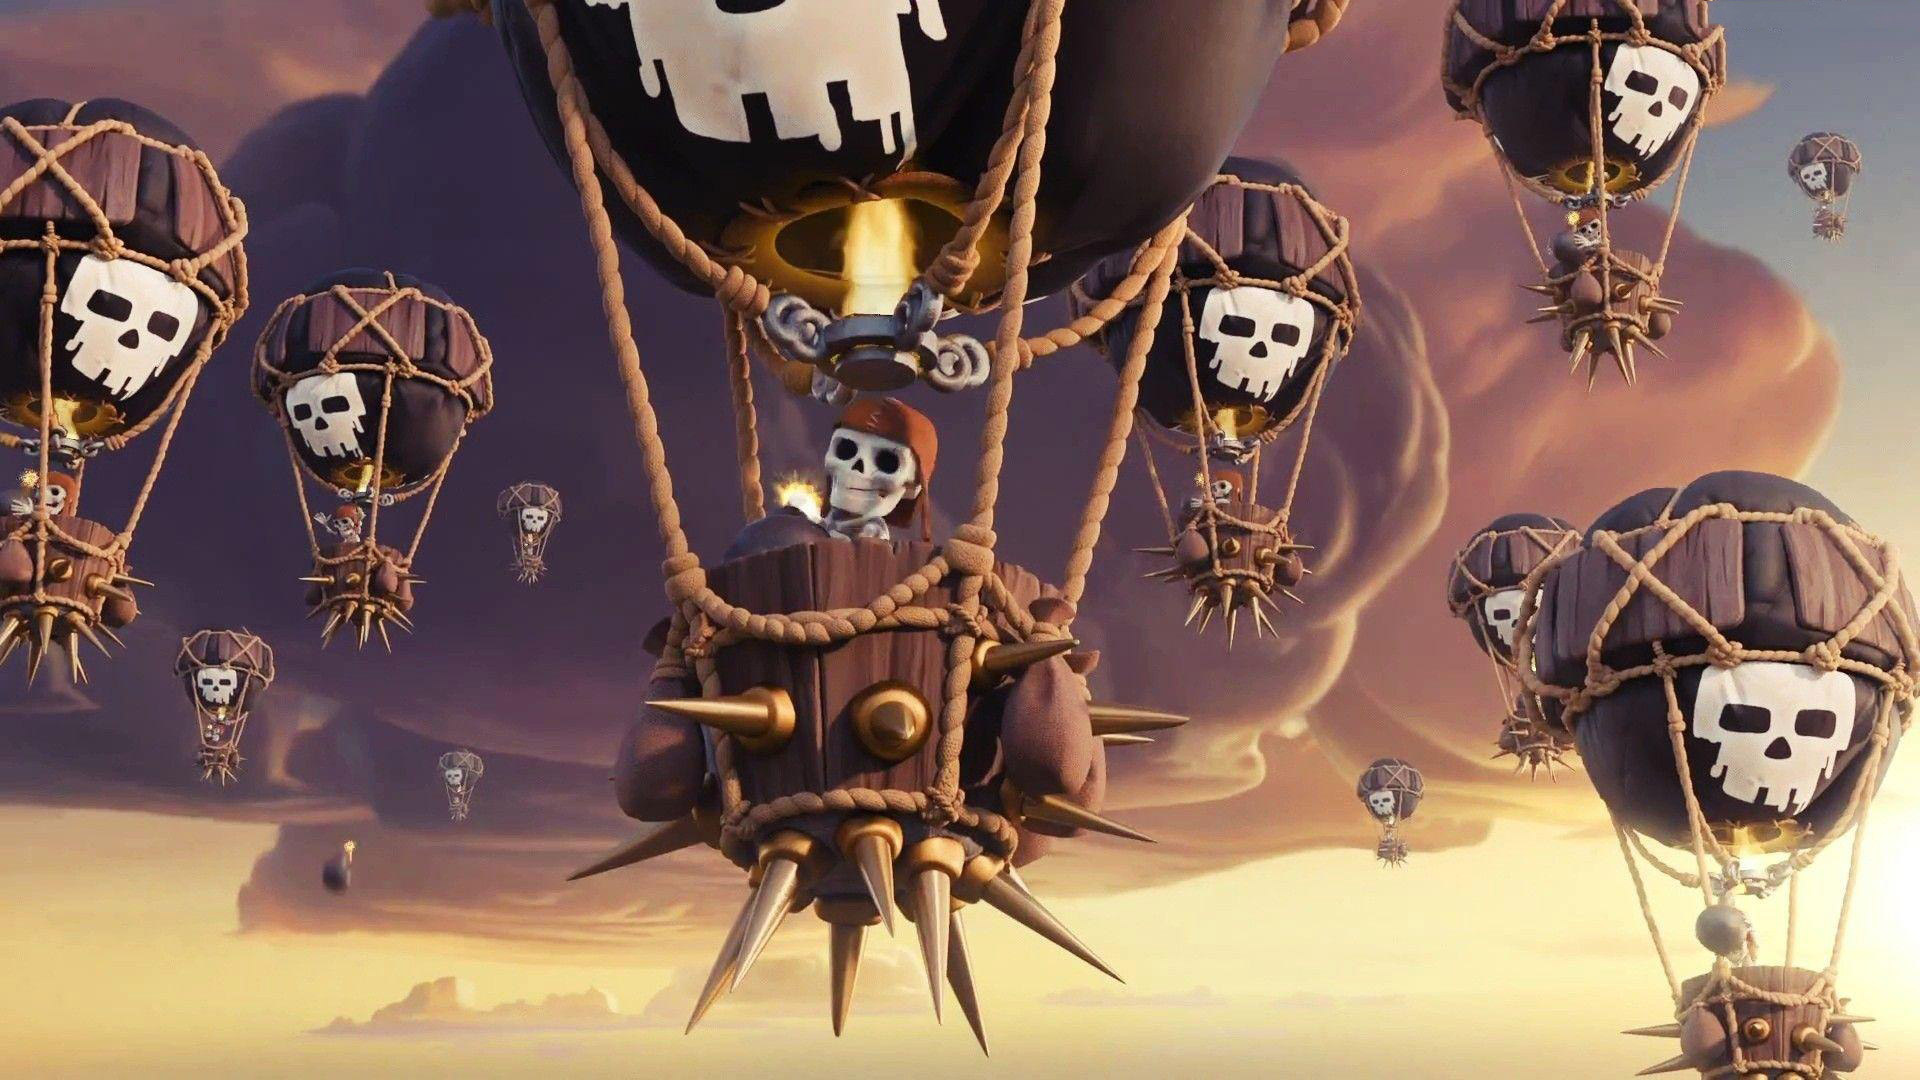 Clash of Clans: The Drop Ship, A balloon that flies in the air and drops Skeletons on its target. 1920x1080 Full HD Wallpaper.